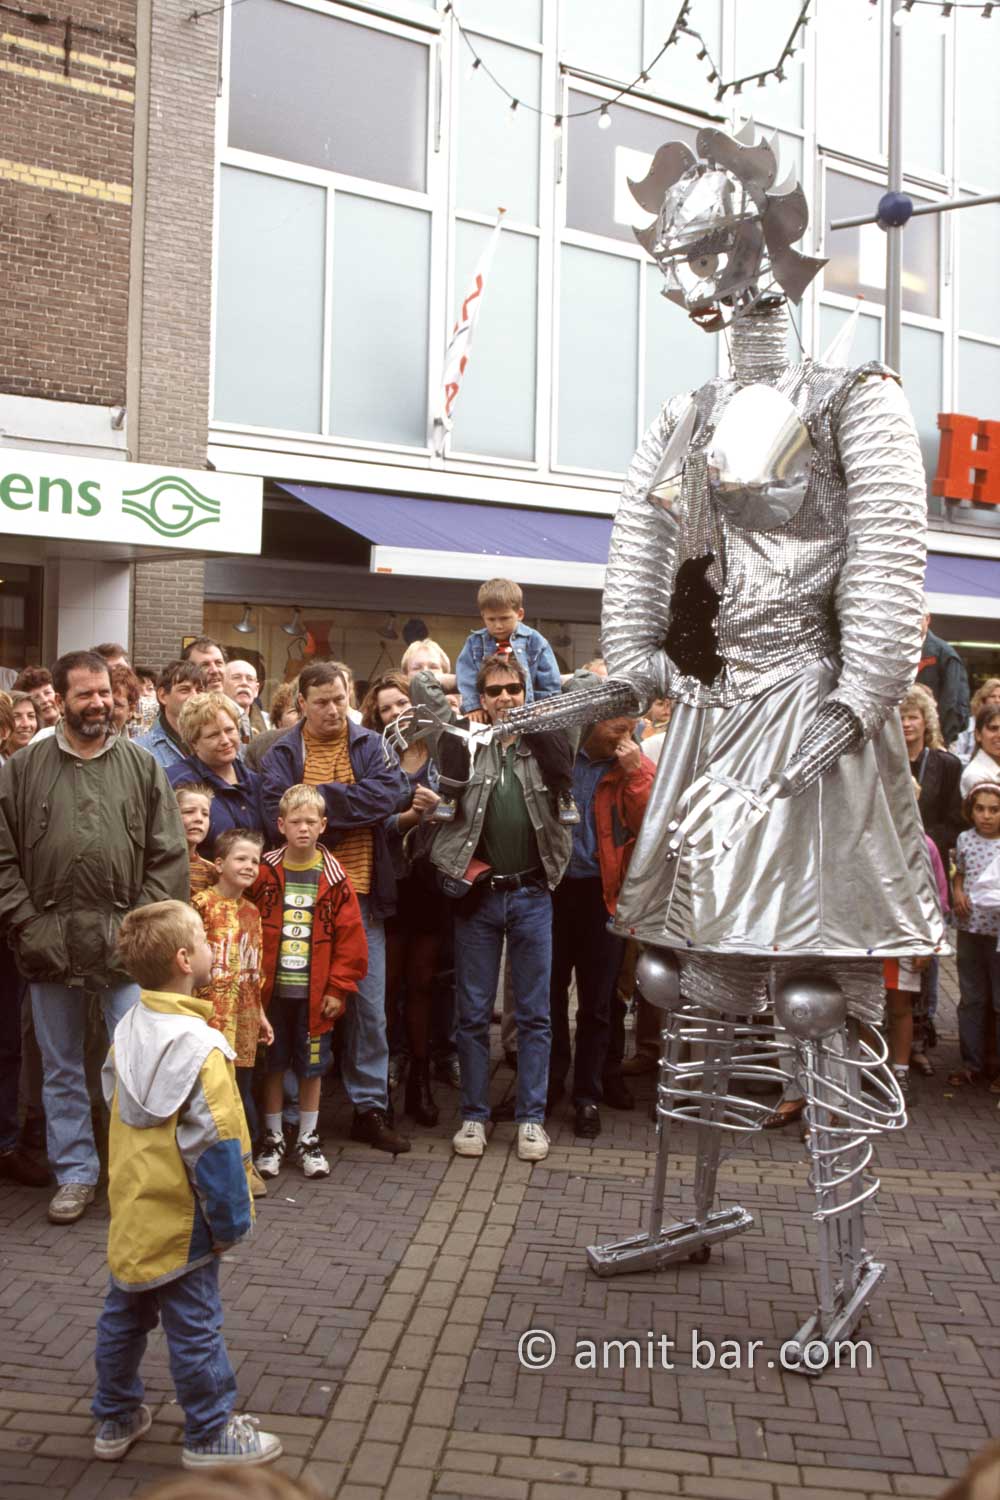 David and Goliath: A child is watching a huge robot on Street theater festival in Doetinchem, The Netherlands